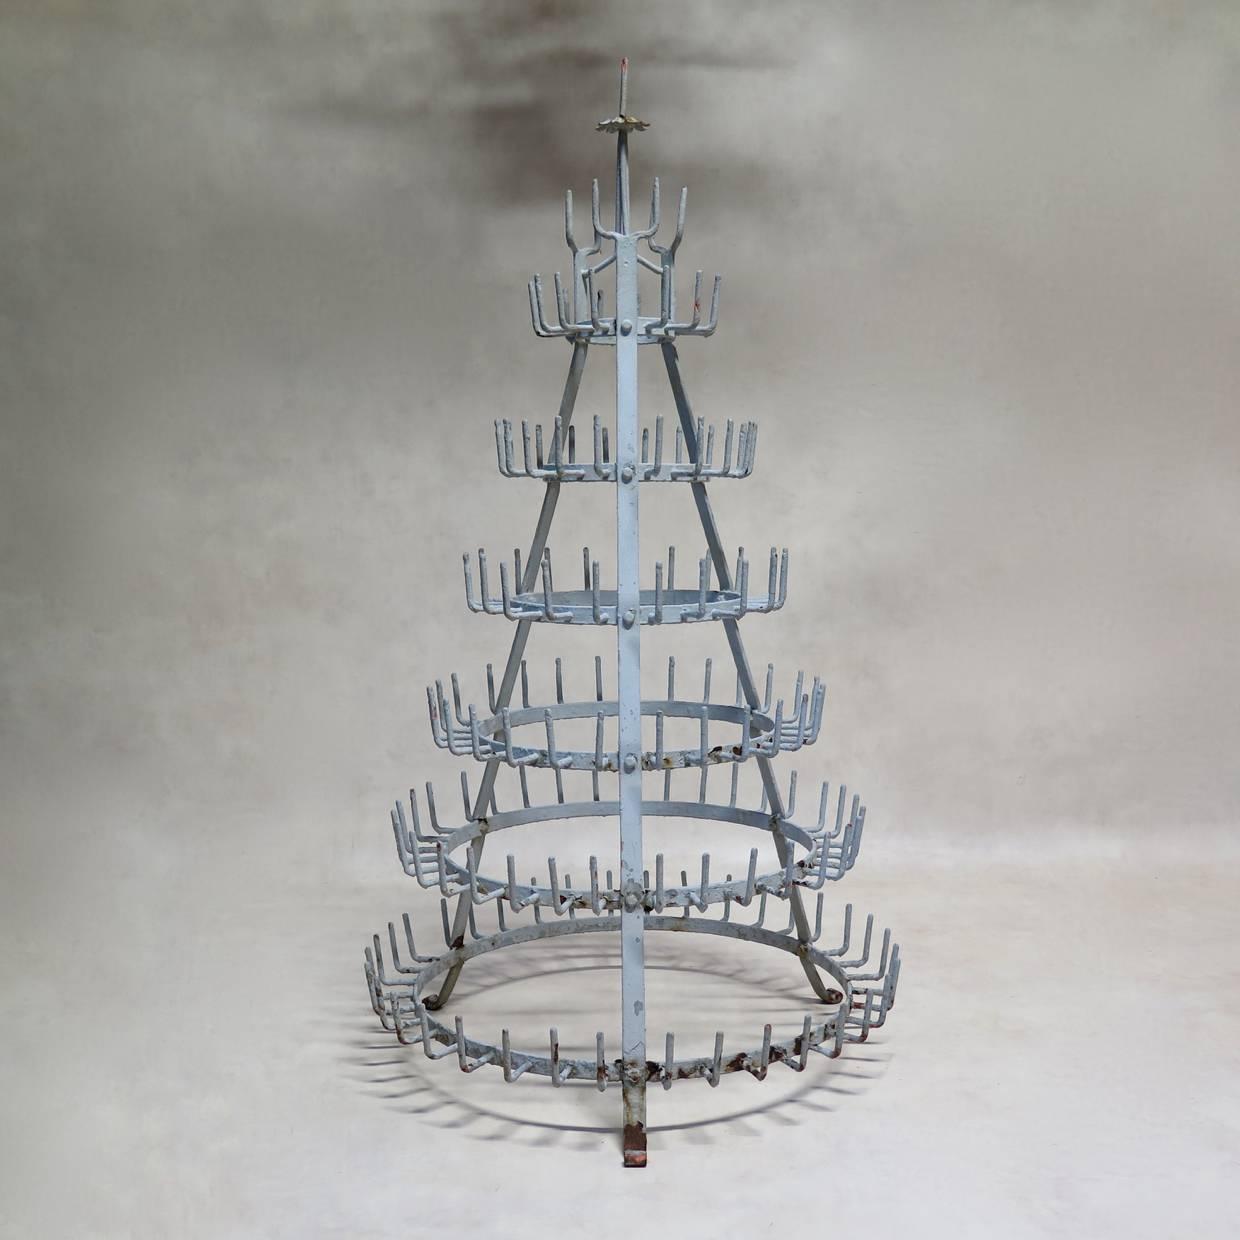 Sturdy and decorative conical wrought iron bottle dryer, with original light grey paint. Orange primer visible beneath.